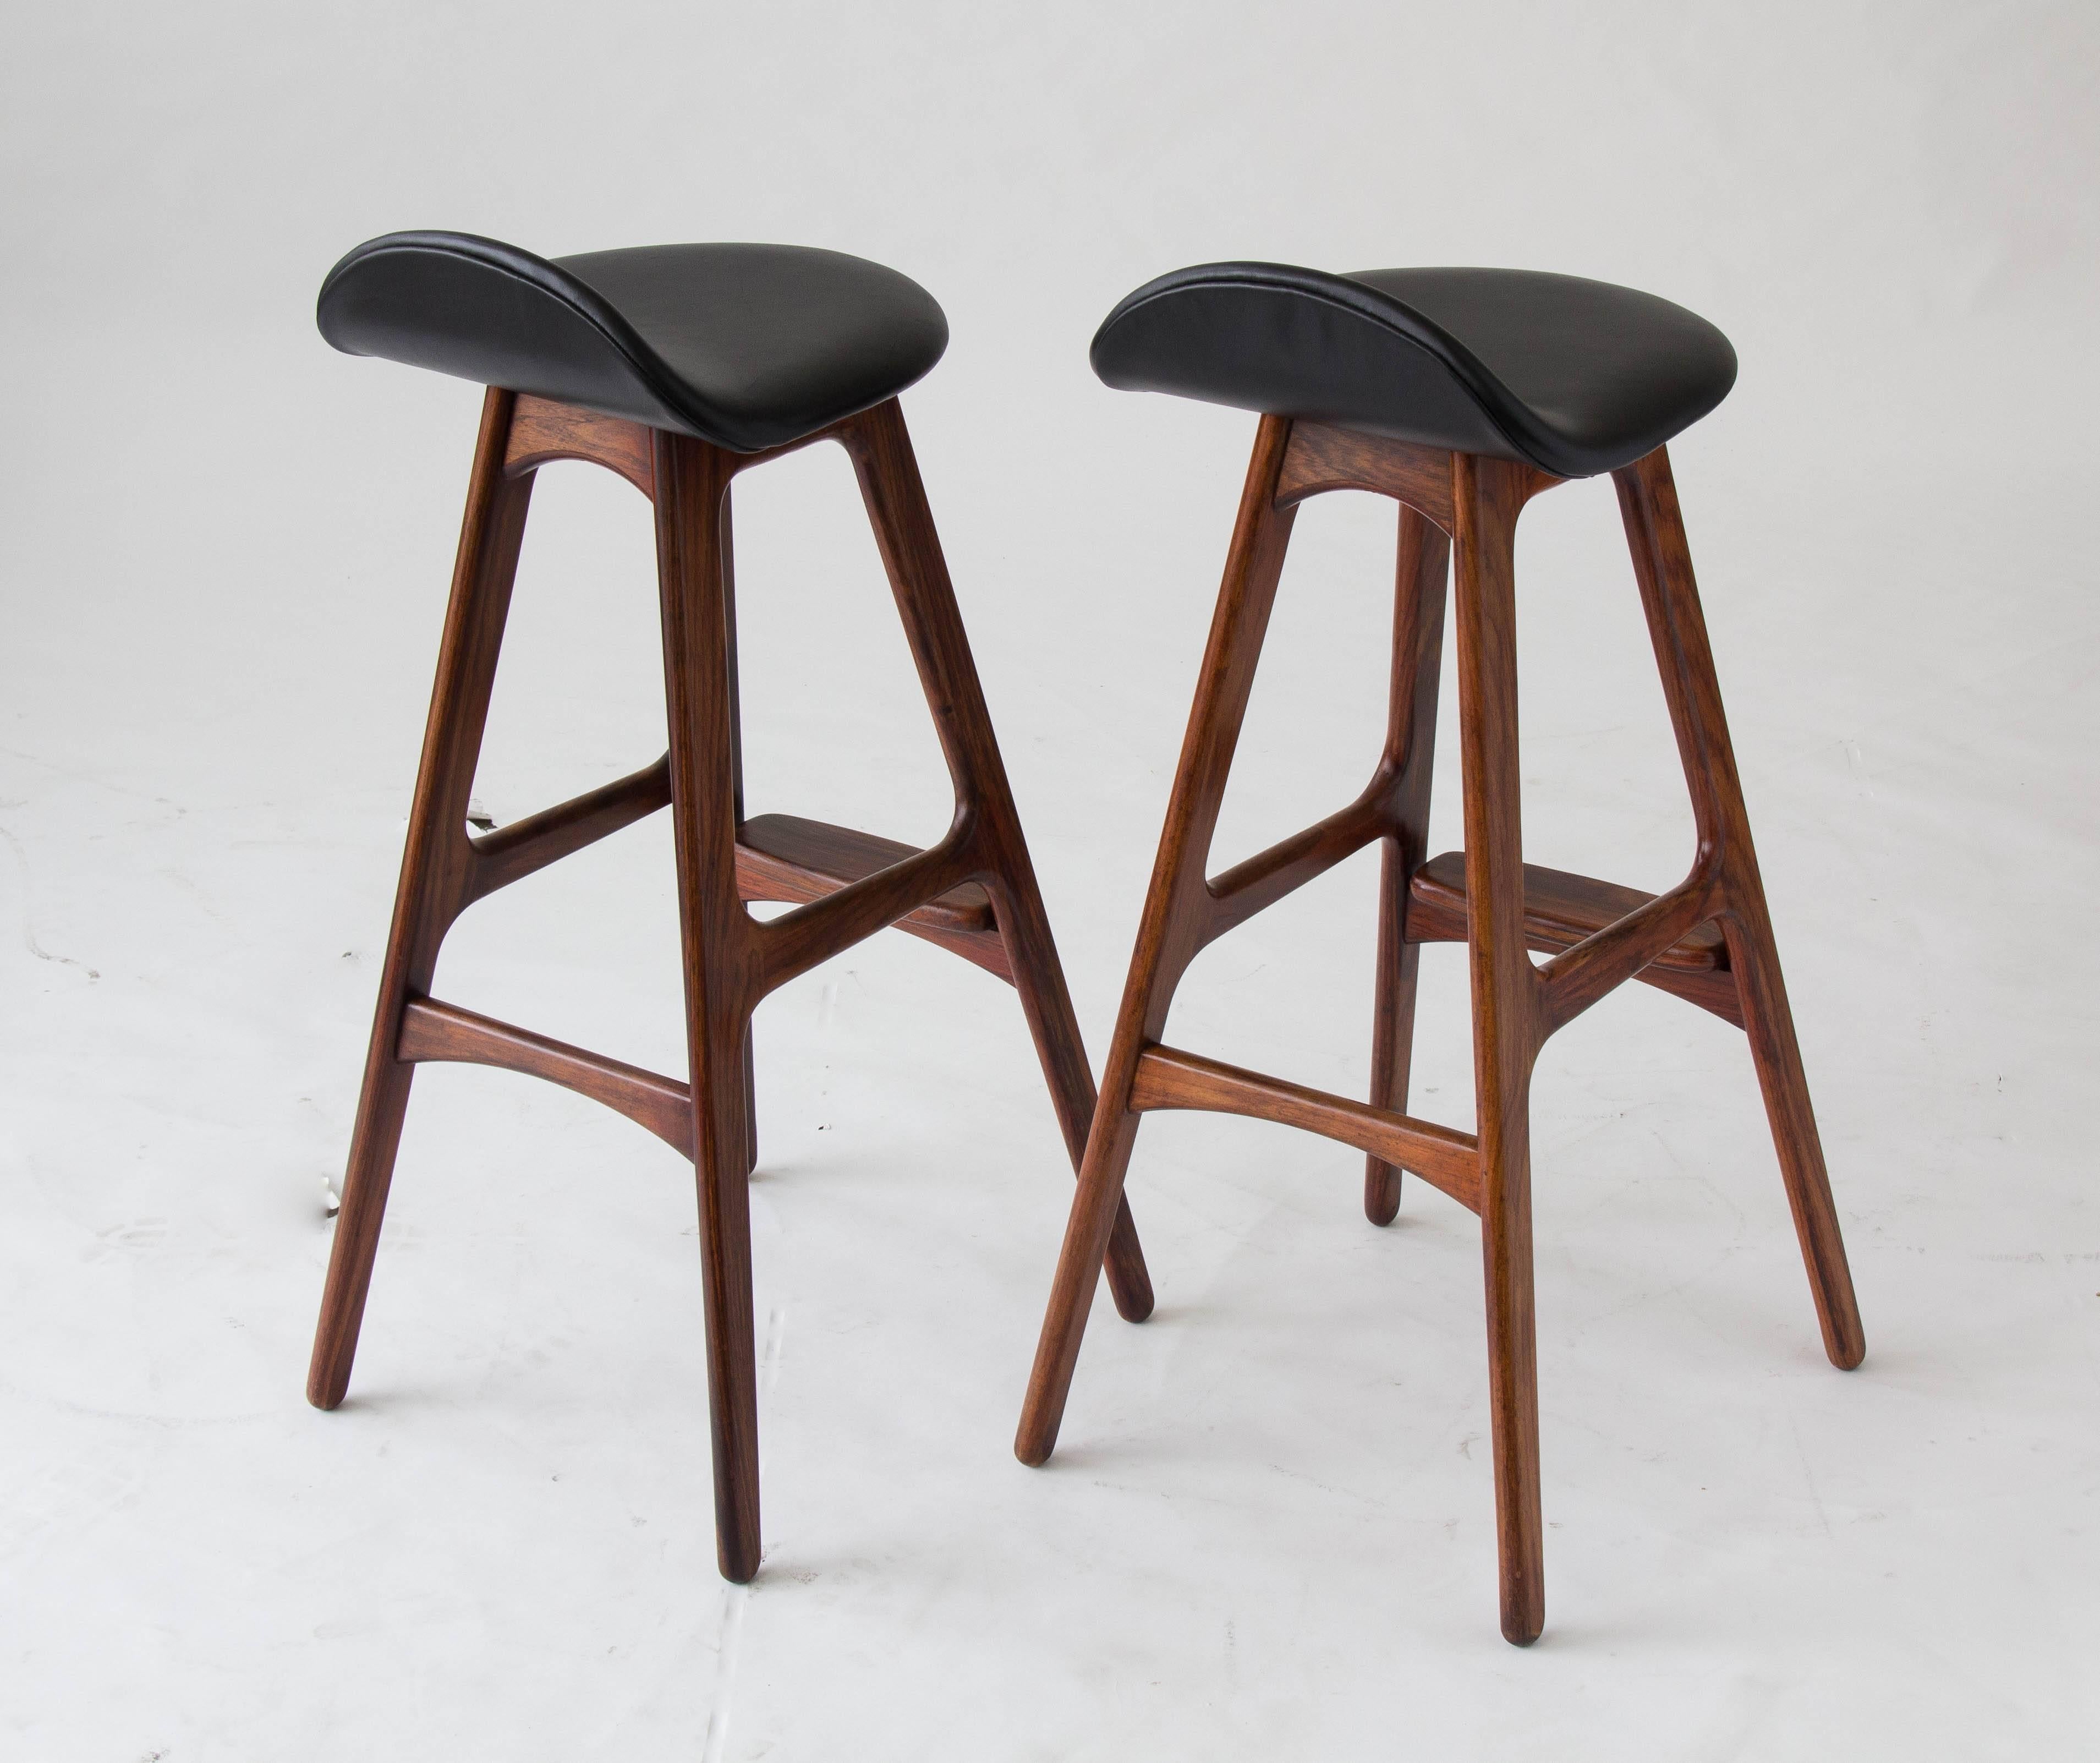 20th Century Pair of Rosewood and Leather Bar Stools by Erik Buch for O.D. Møbler